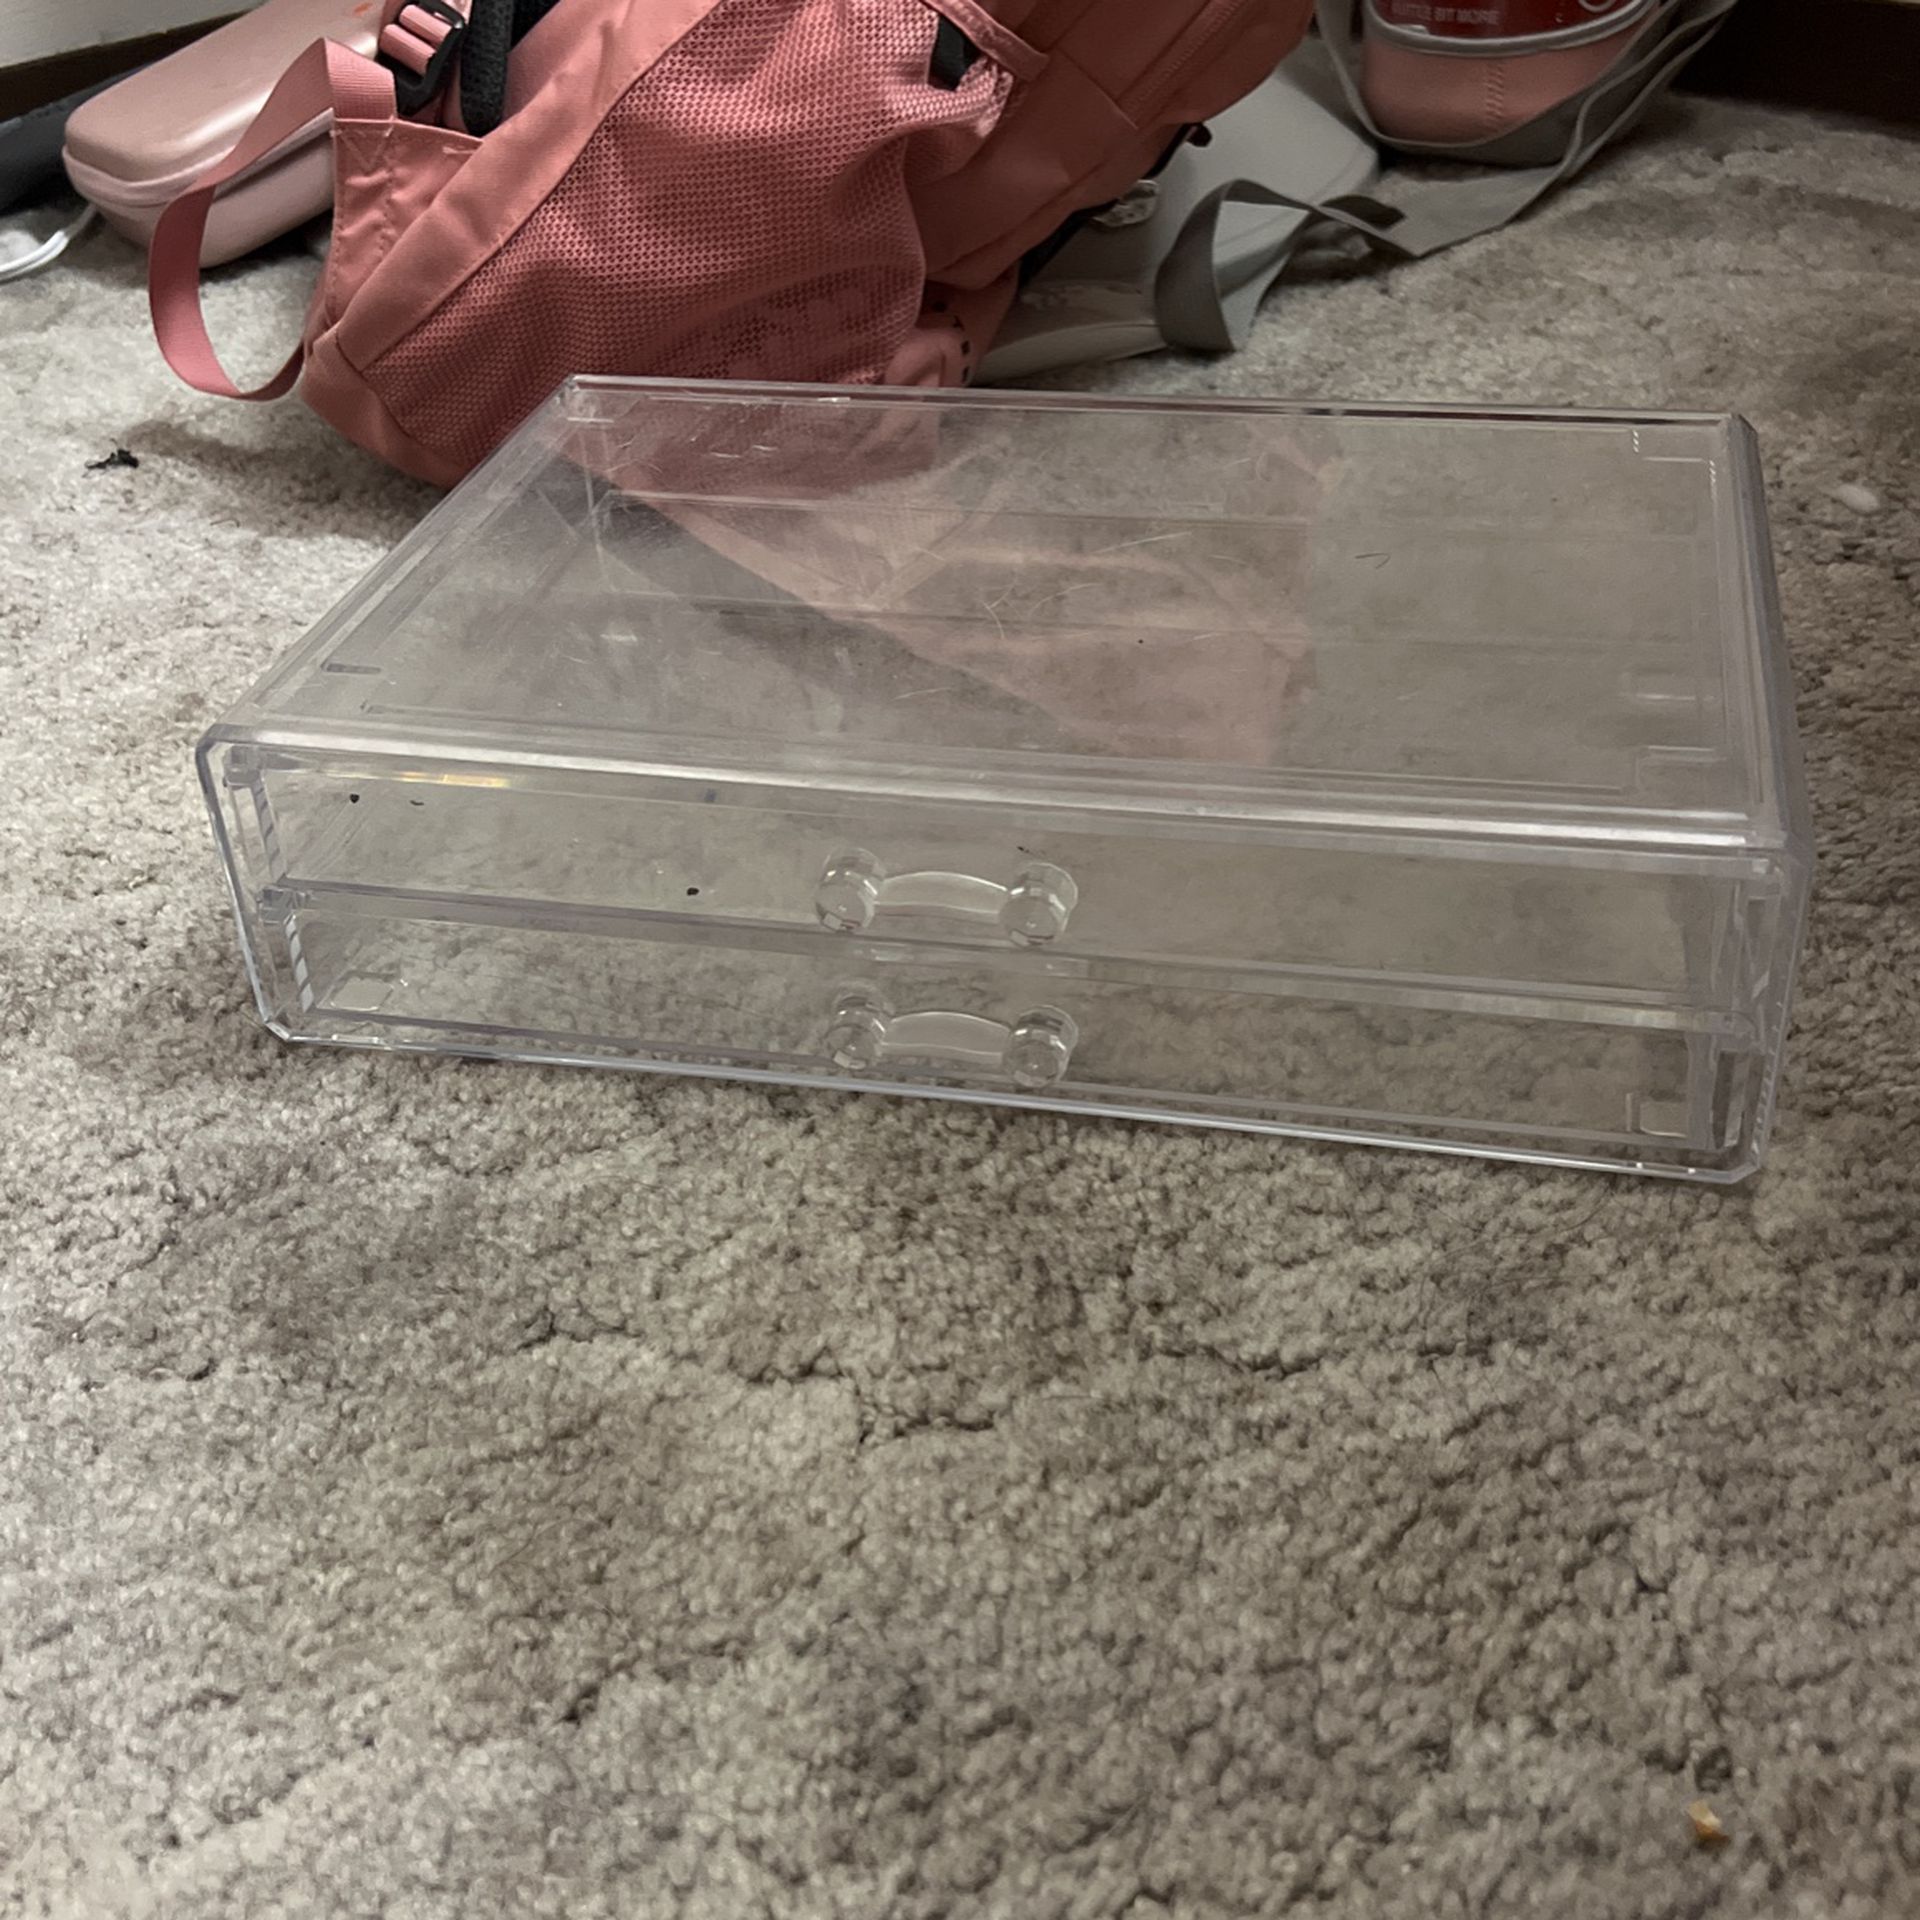 clear storage container